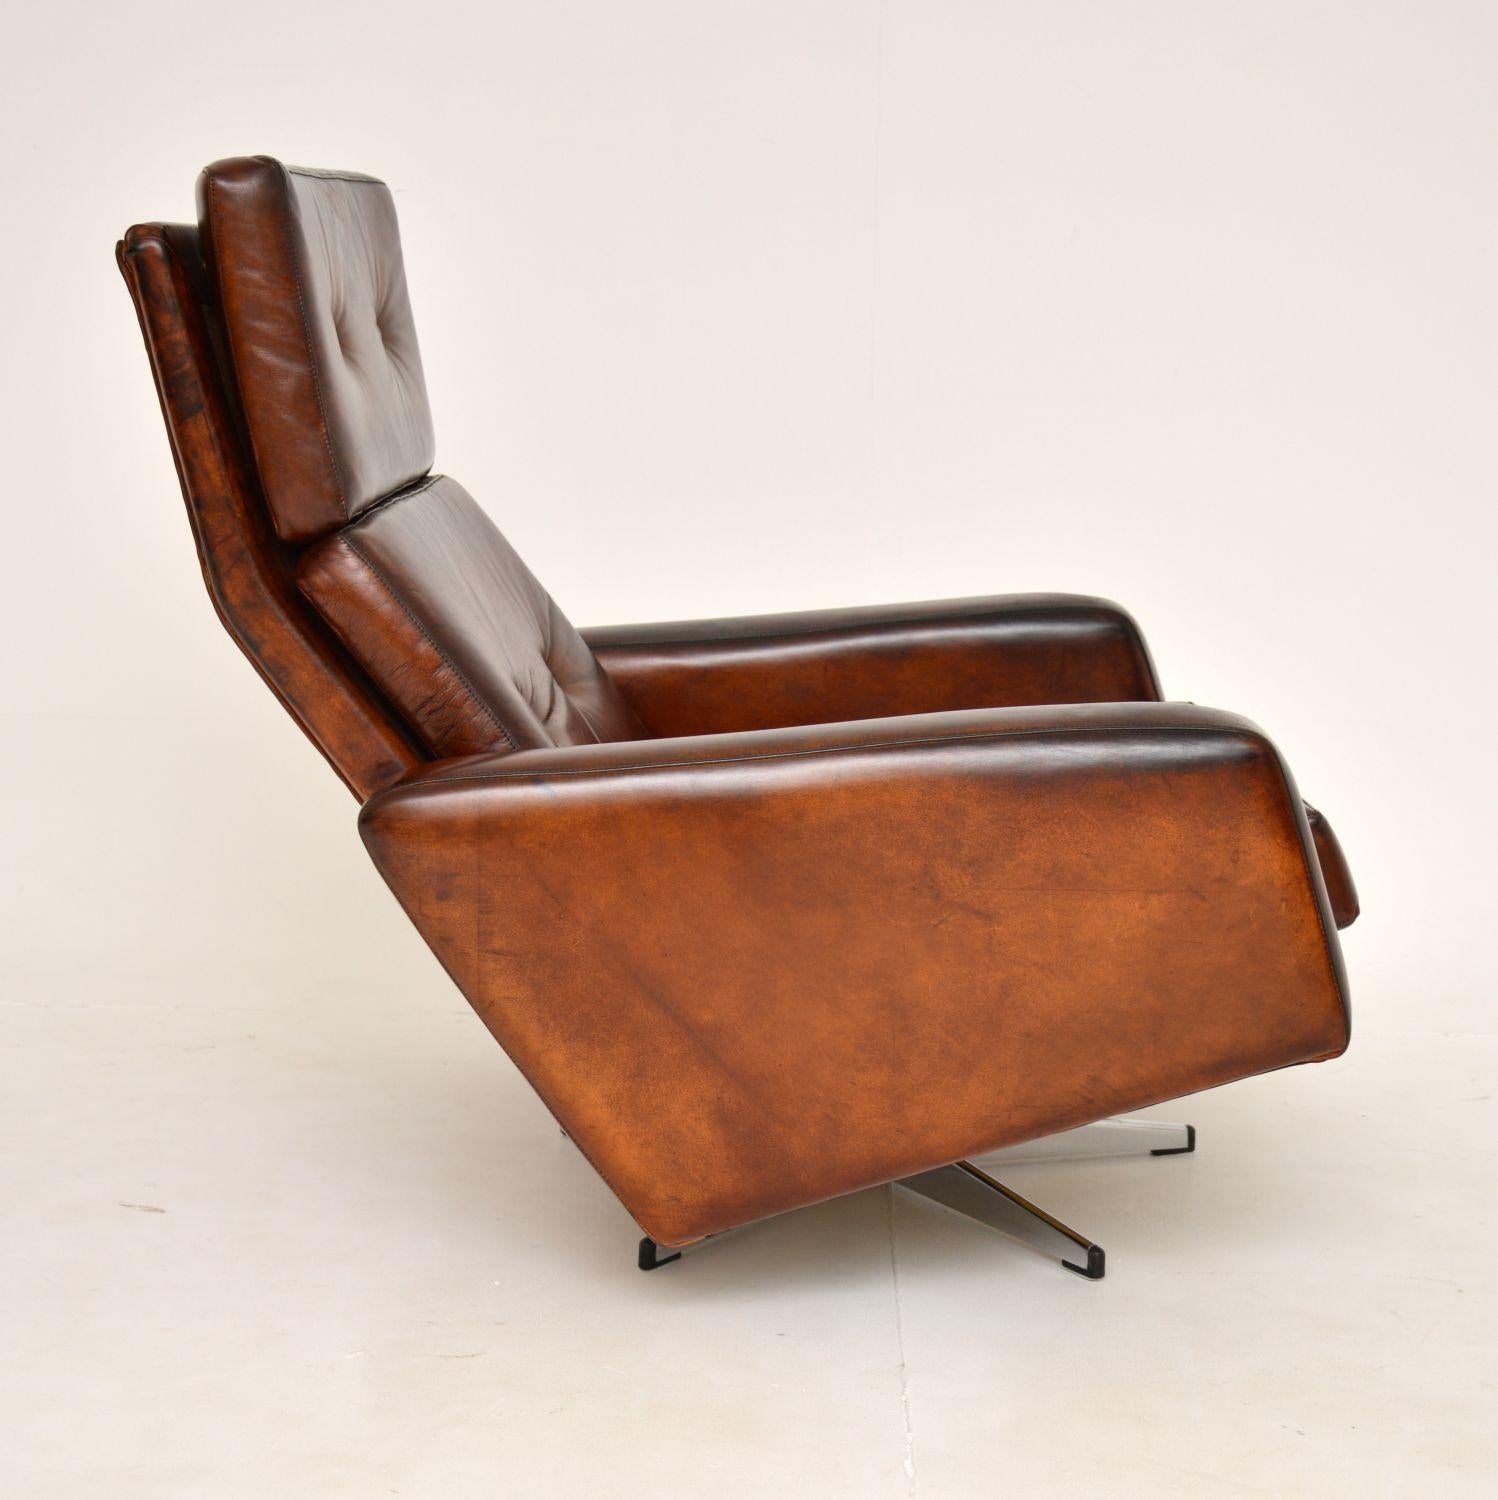 English 1960's Vintage Leather Swivel 'Leo' Chair by Robin Day for Hille